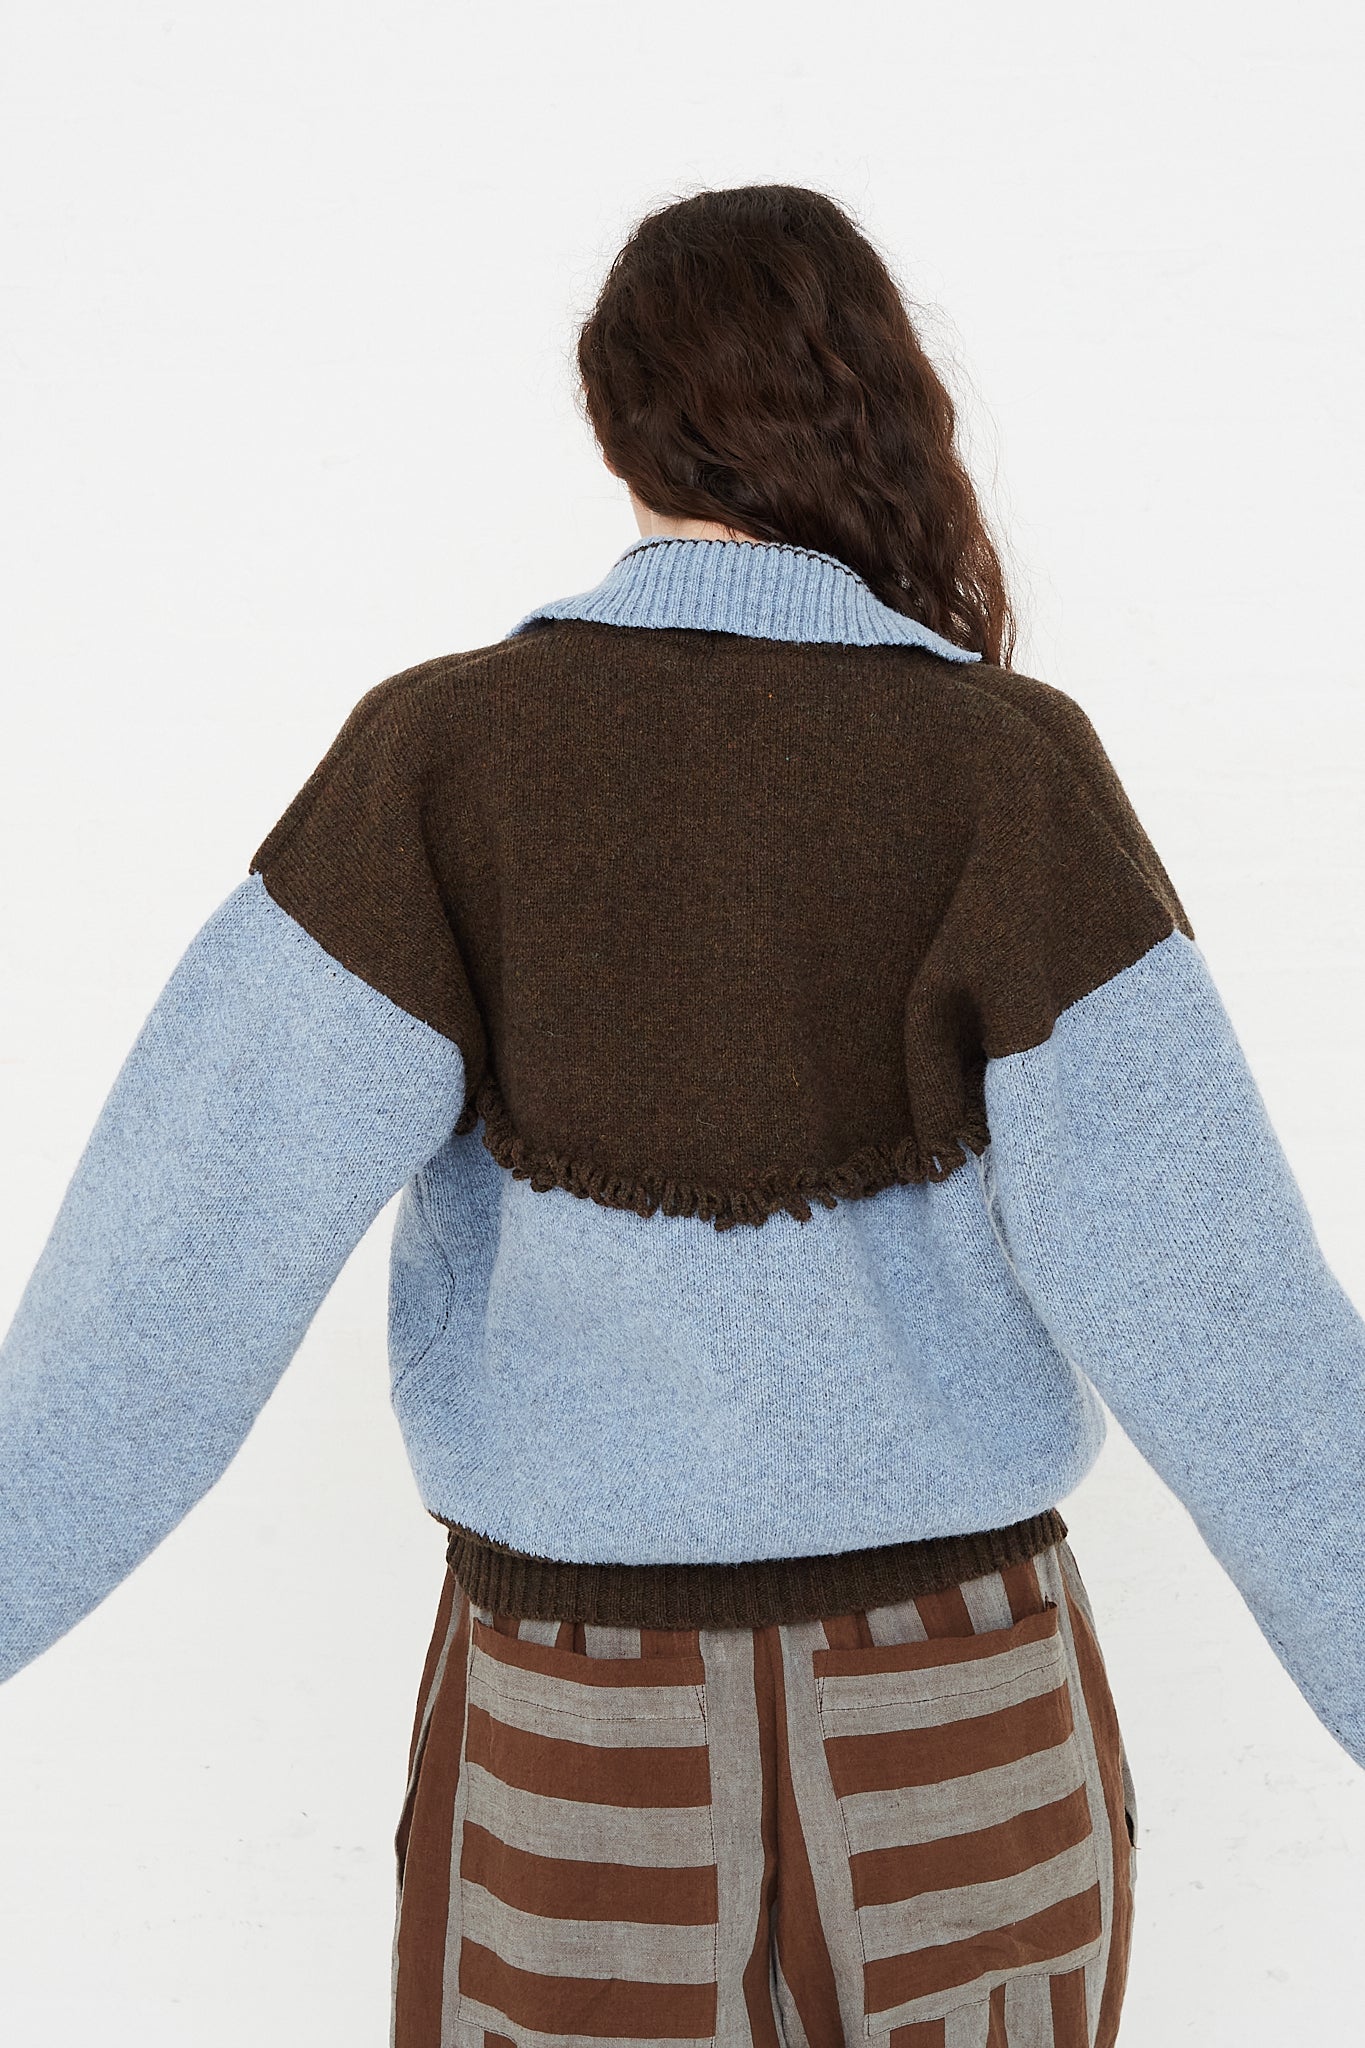 A model wearing a knit pullover sweater in a British wool. Features a polo collar with dropped shoulders and contrast color on top, cuffs and hem. Back view and up close. Showcasing sleeves, back details and pant pockets. Designed by Cawley - Oroboro Store